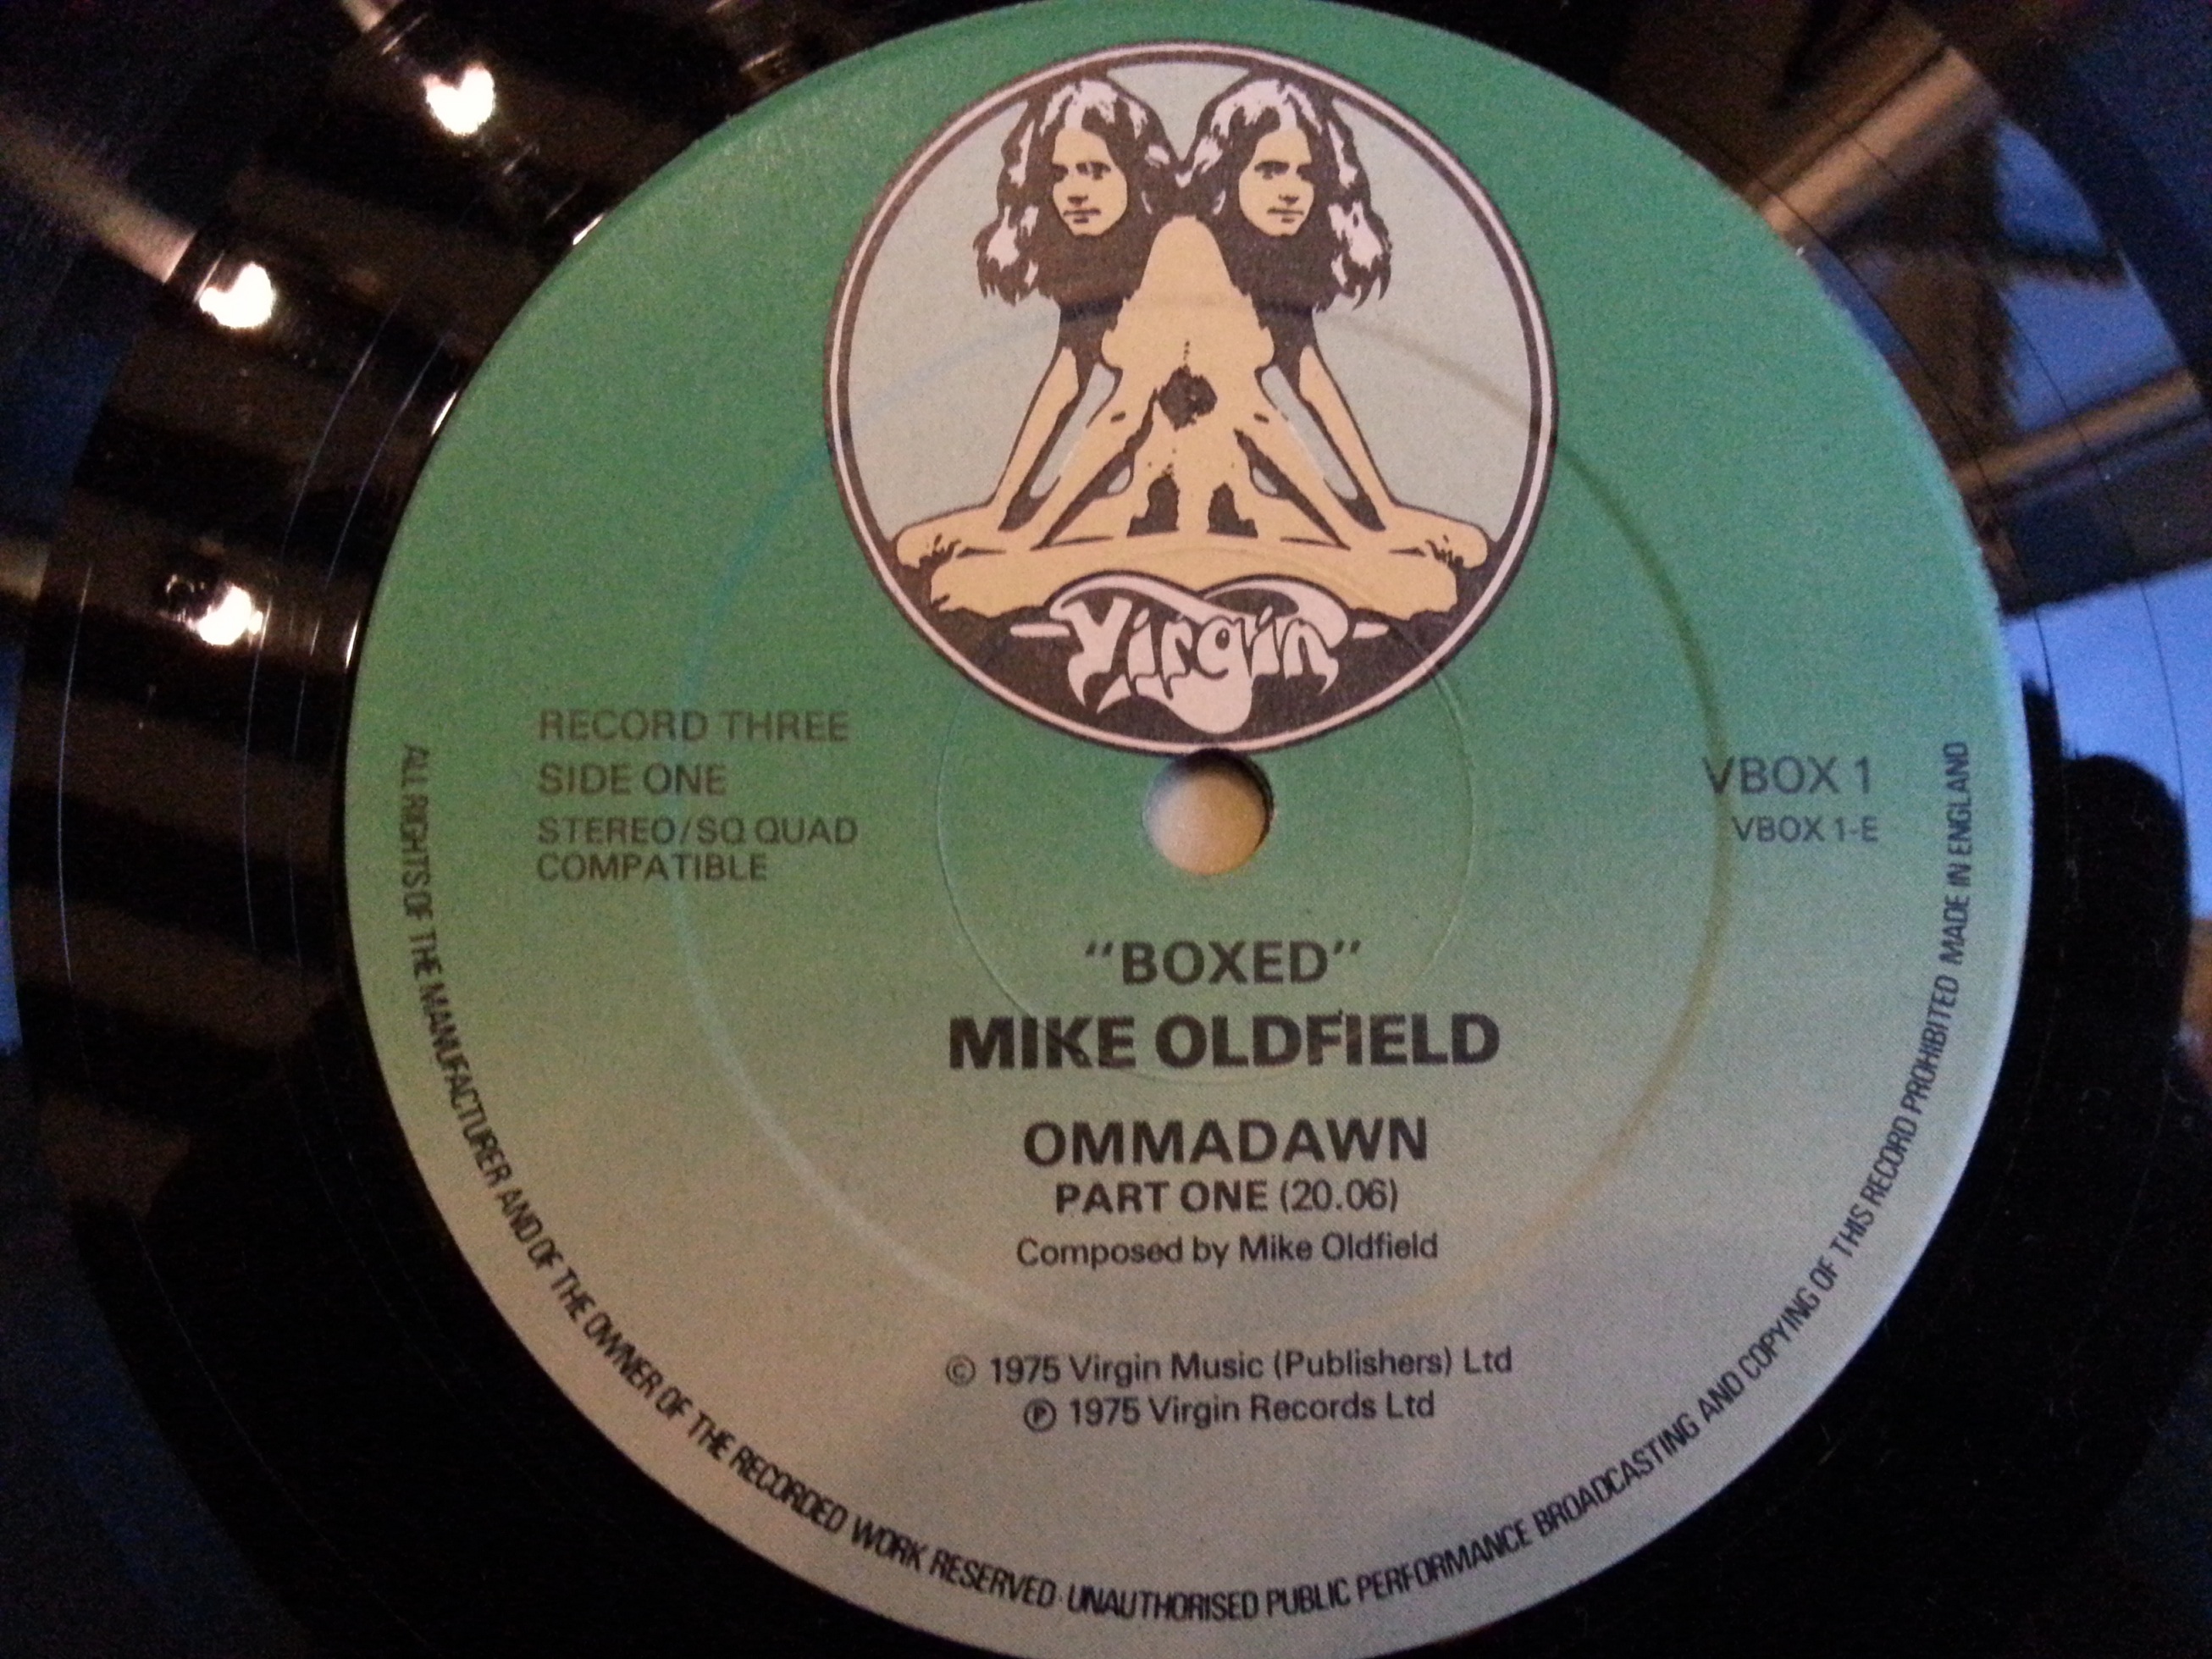 Boxed Virgin LP - Mike Oldfield Worldwide Discography